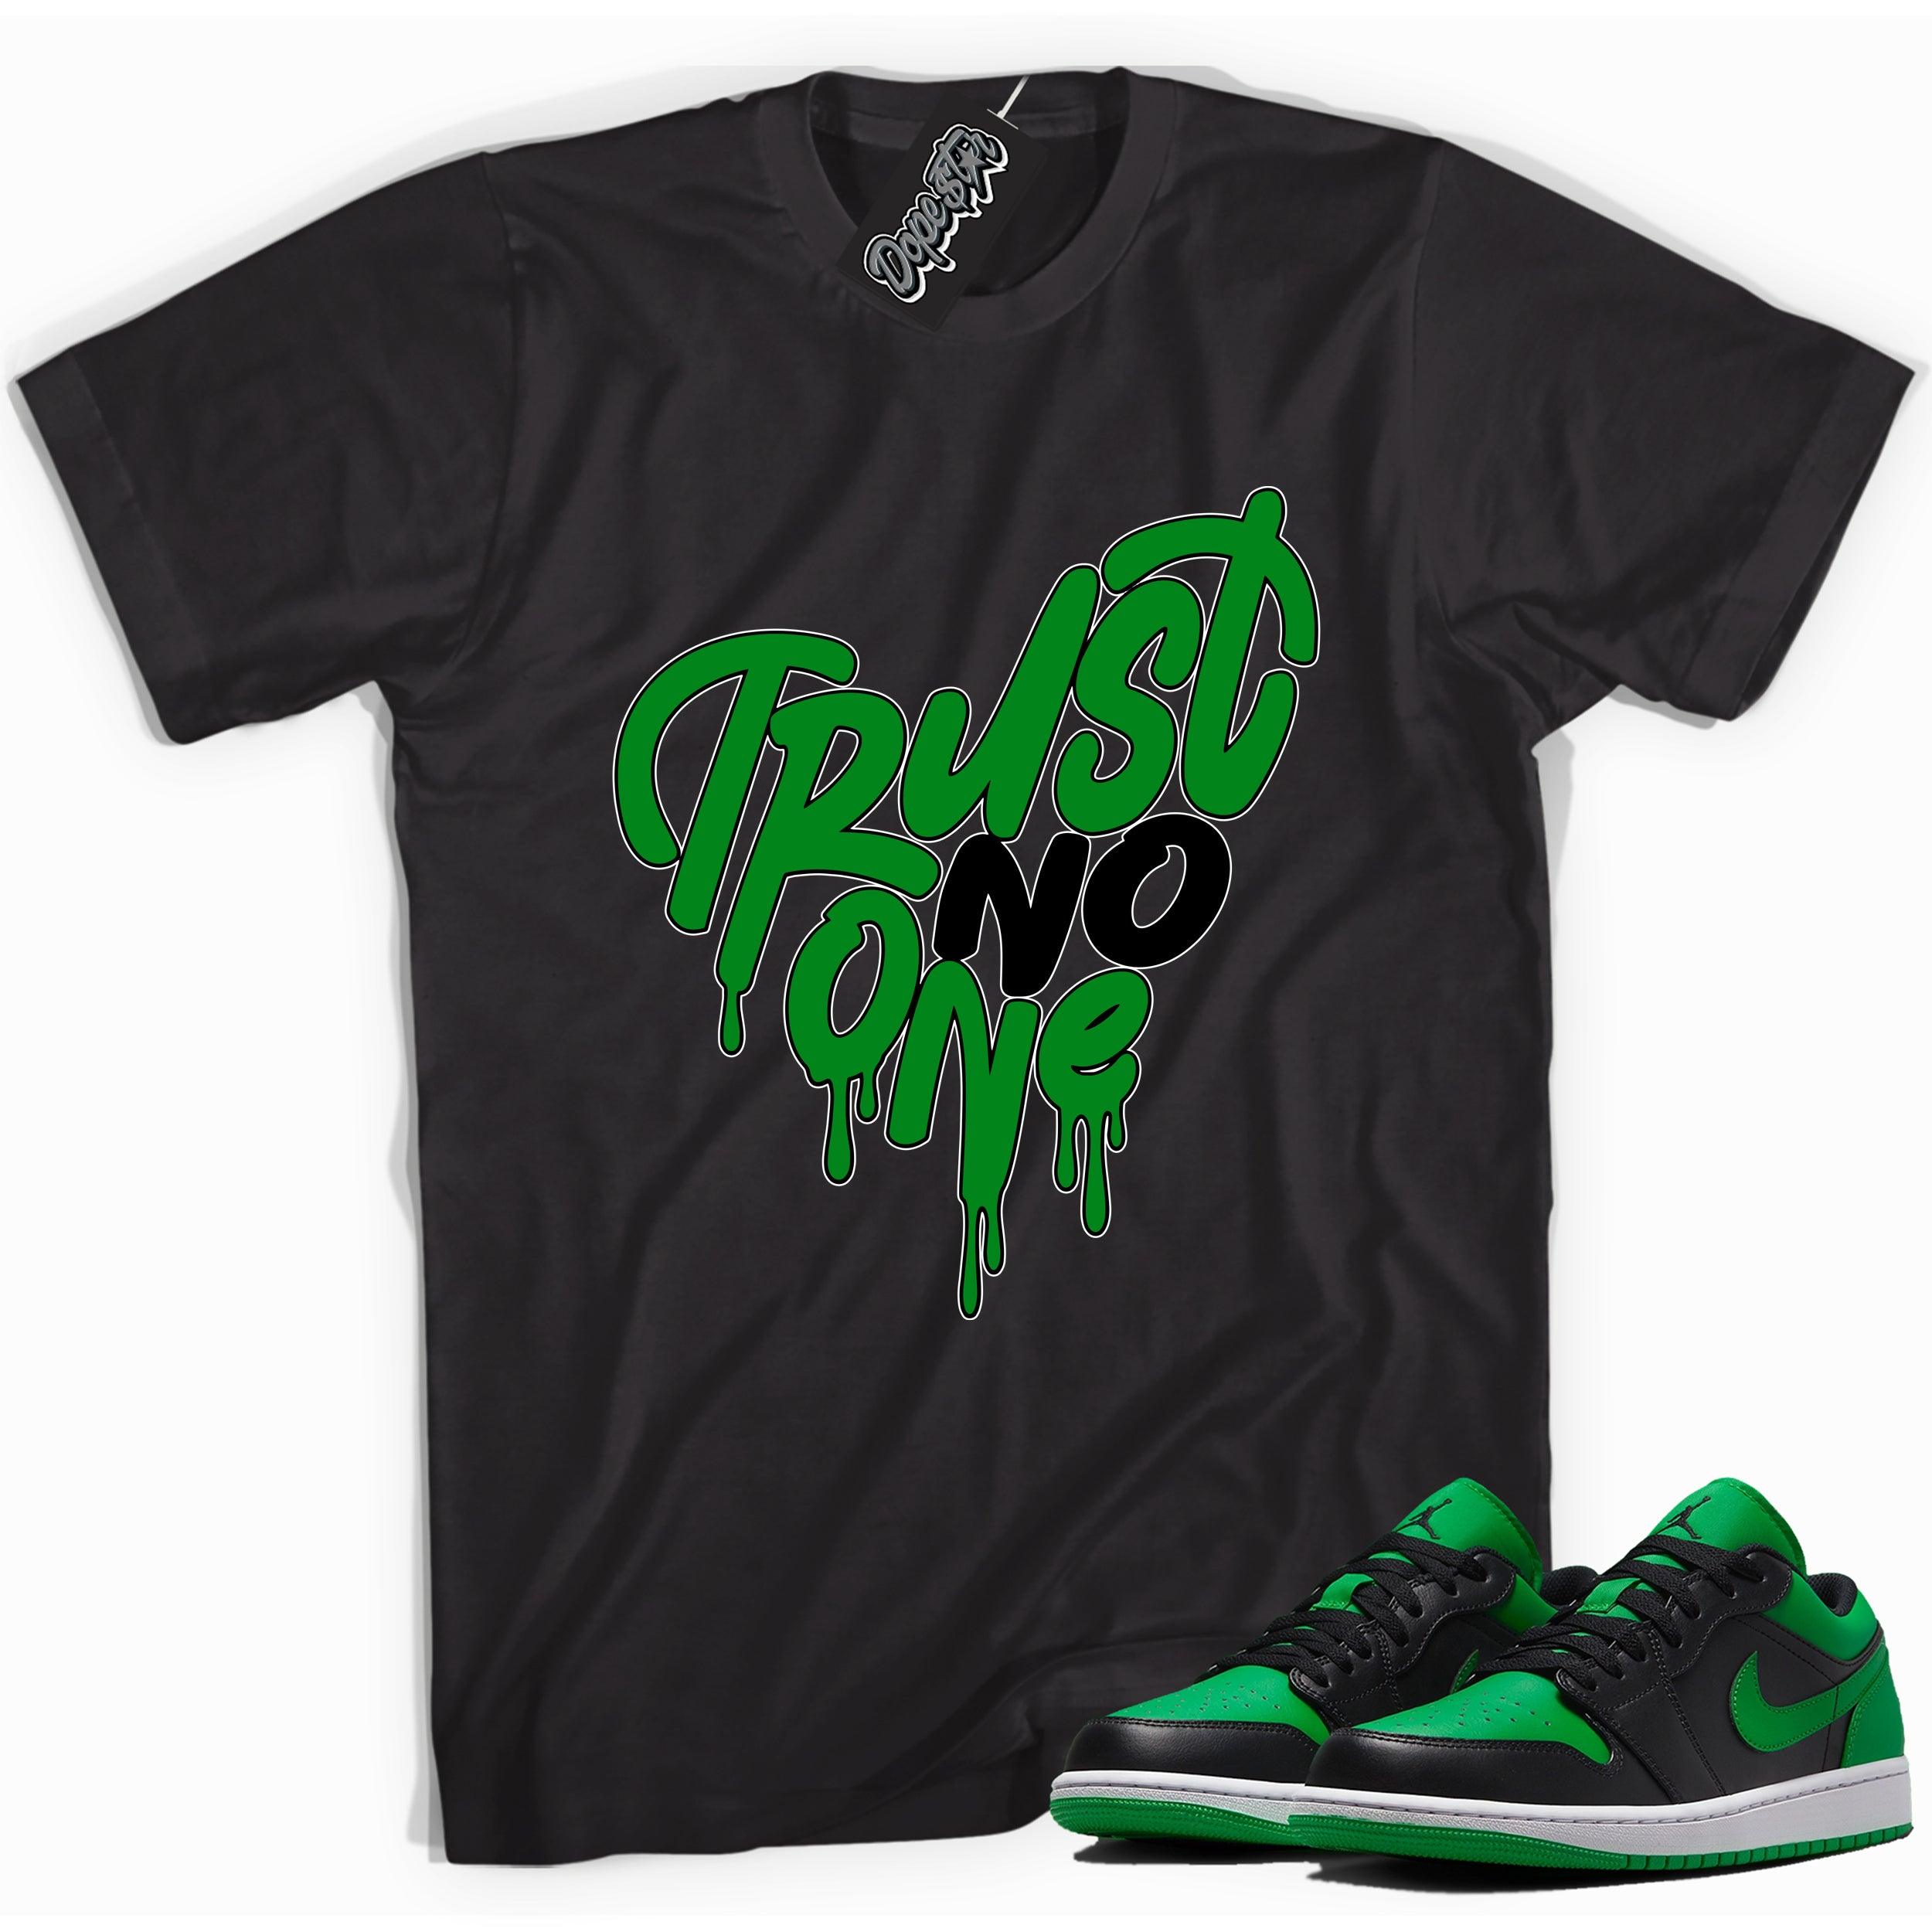 Cool black graphic tee with 'trust no one' print, that perfectly matches Air Jordan 1 Low Lucky Green sneakers